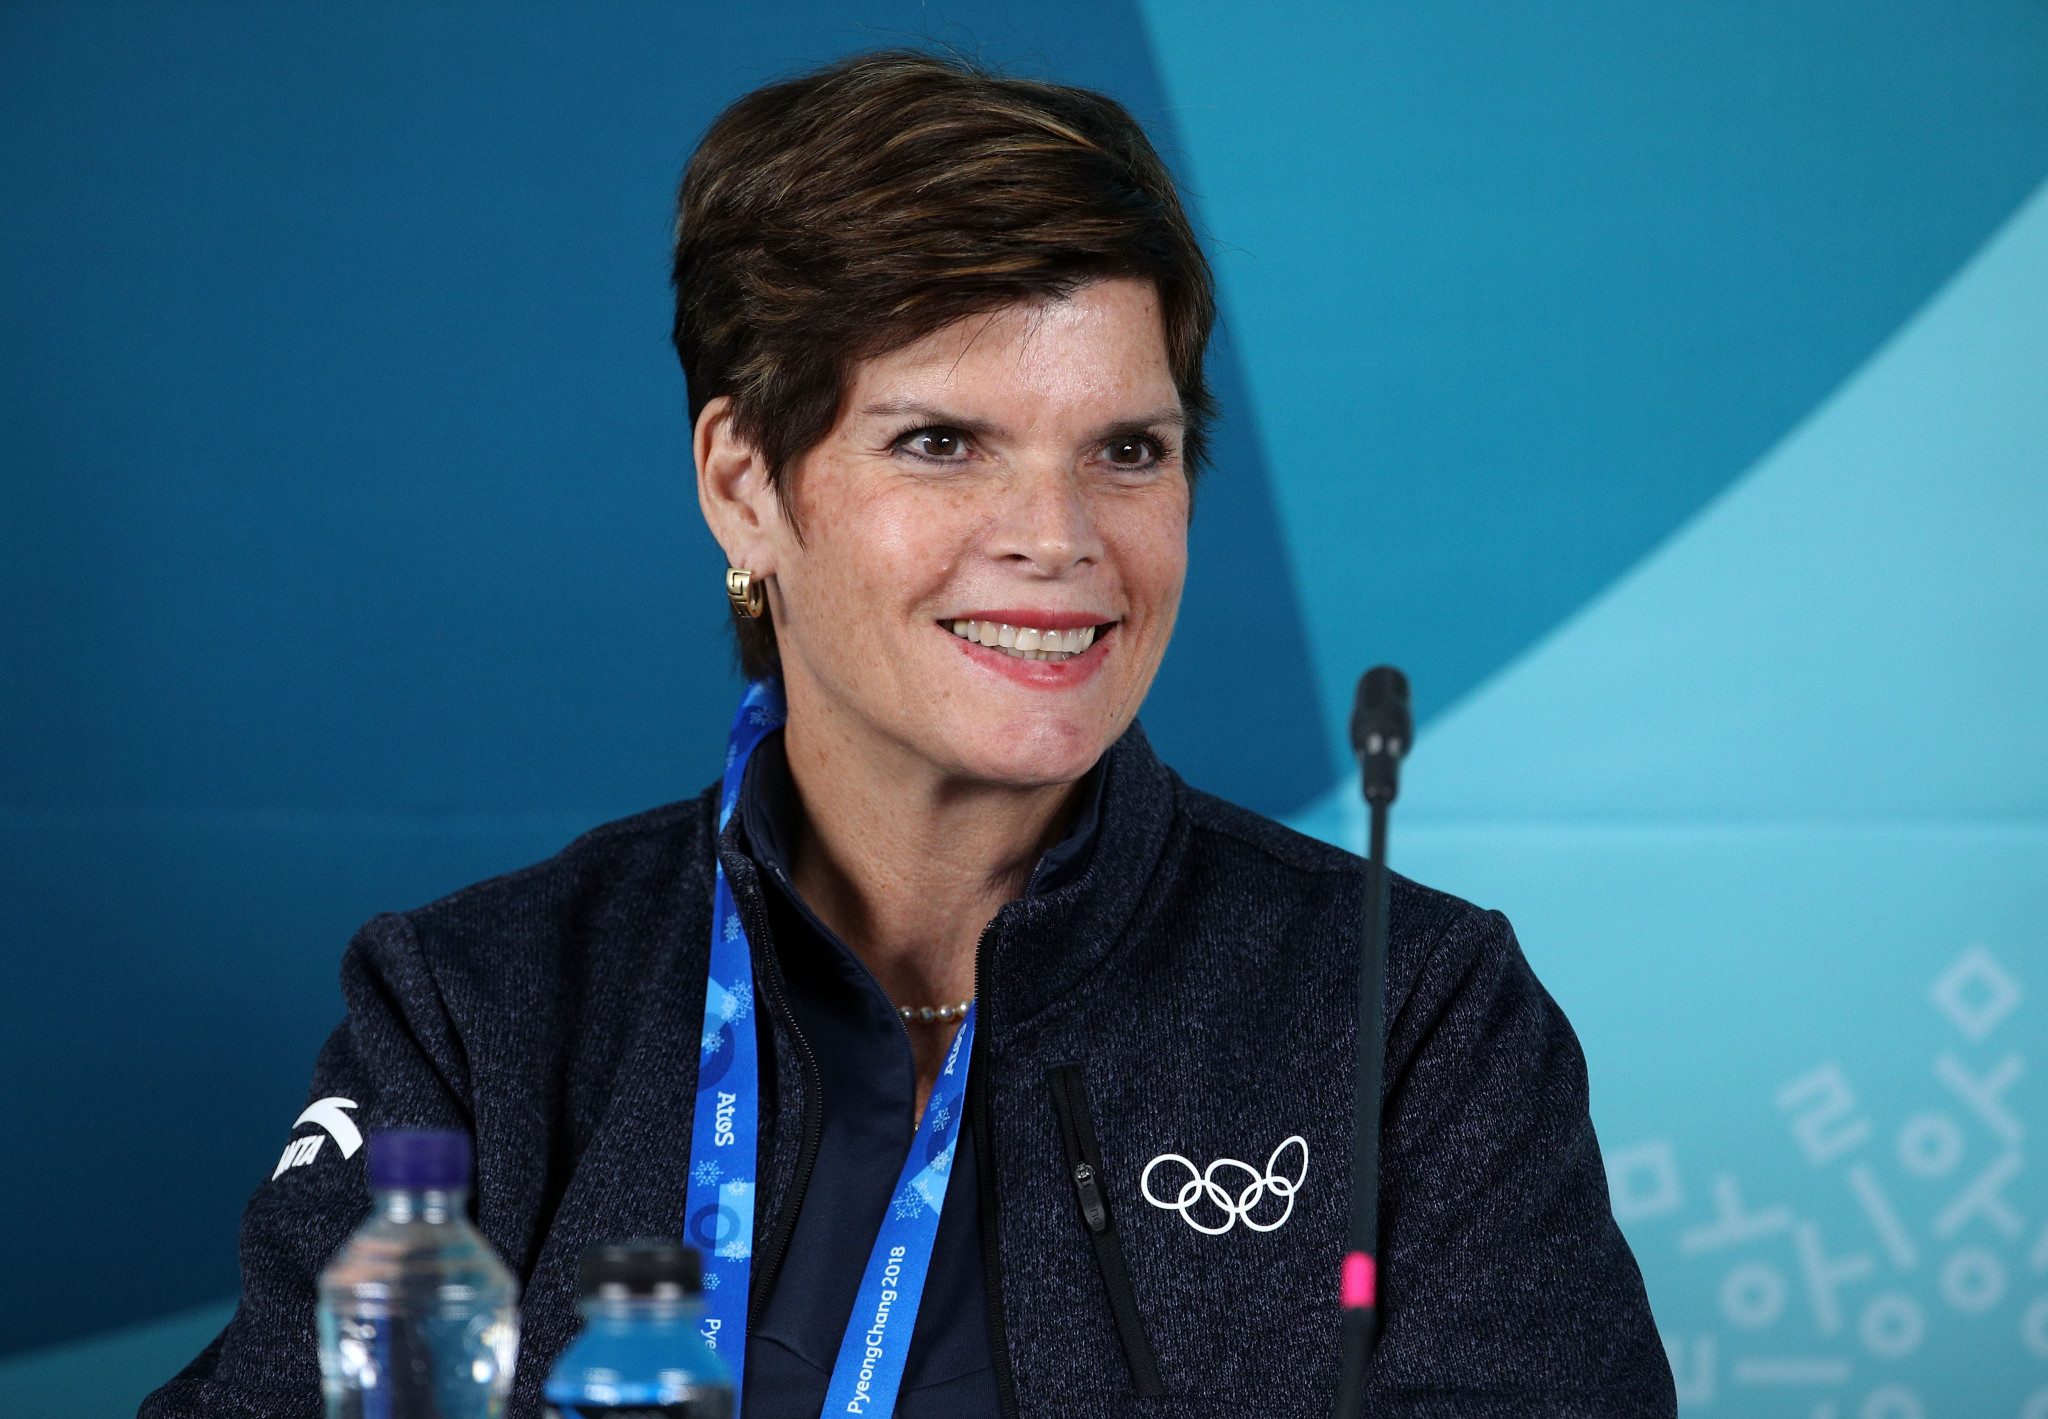 Hoevertsz claims "very encouraging" progress made by Los Angeles 2028 at second IOC Coordination Commission meeting